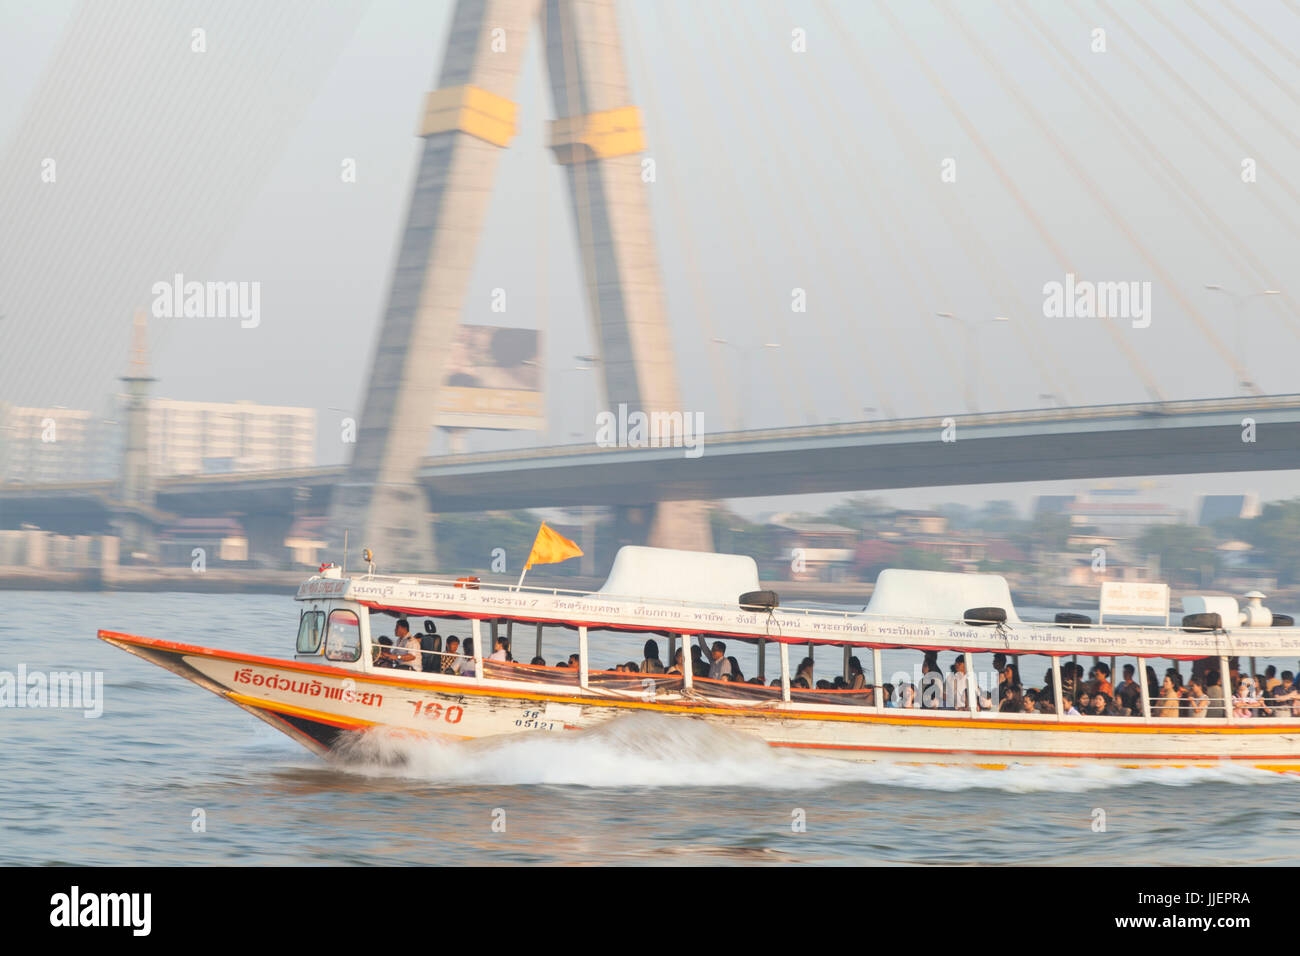 A water taxi speeds past on the Chao Phraya River below the cable-stayed Rama VIII Bridge, Phra Nakhon District, Bangkok, Thailand. Stock Photo